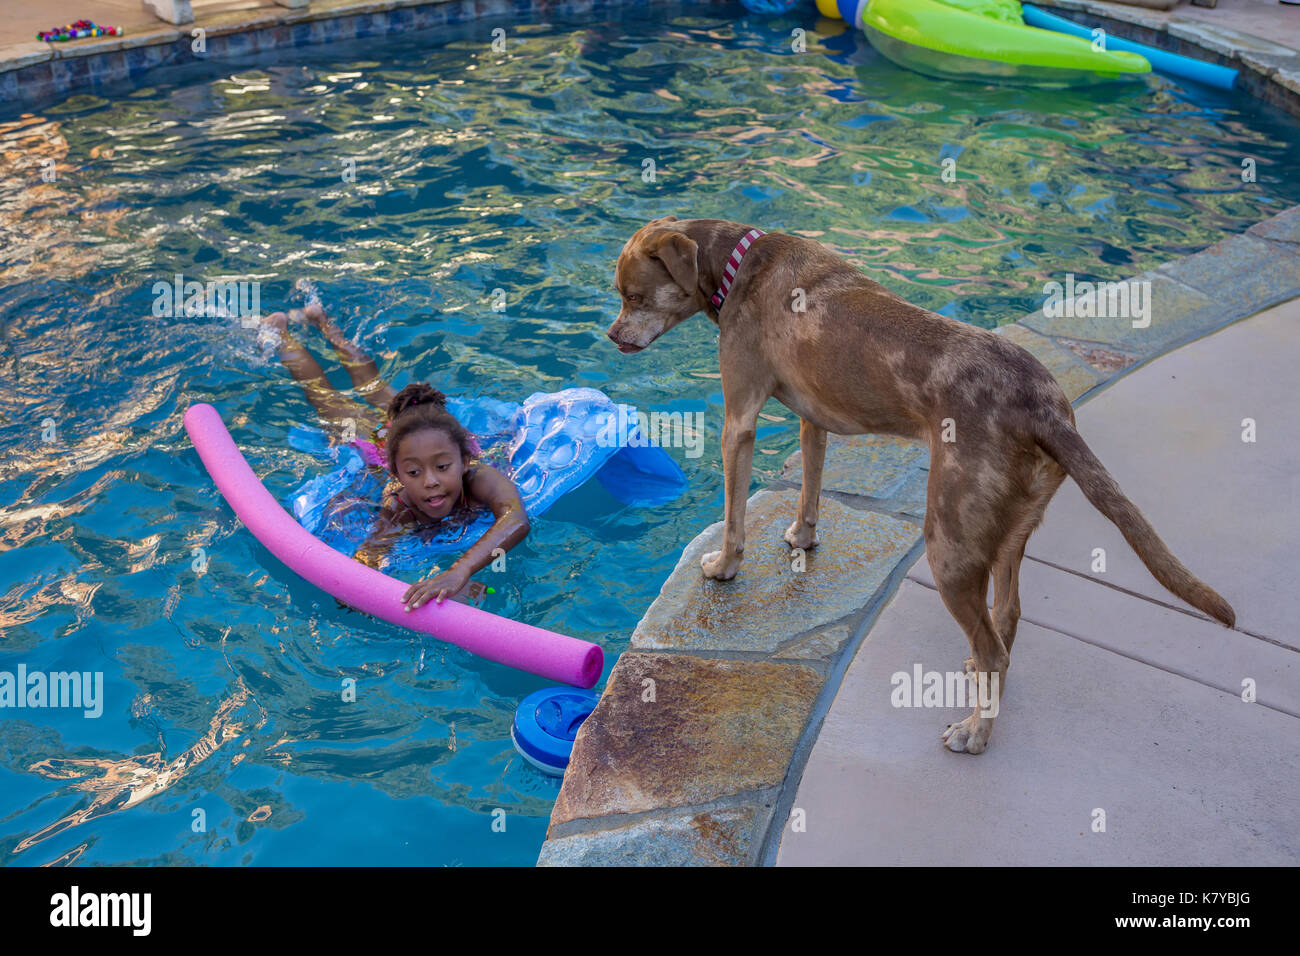 mix-breed dog looking at girl, African-American girl, child, swimmer, girl swimming, swimming, freshwater swimming pool, Castro Valley, California Stock Photo